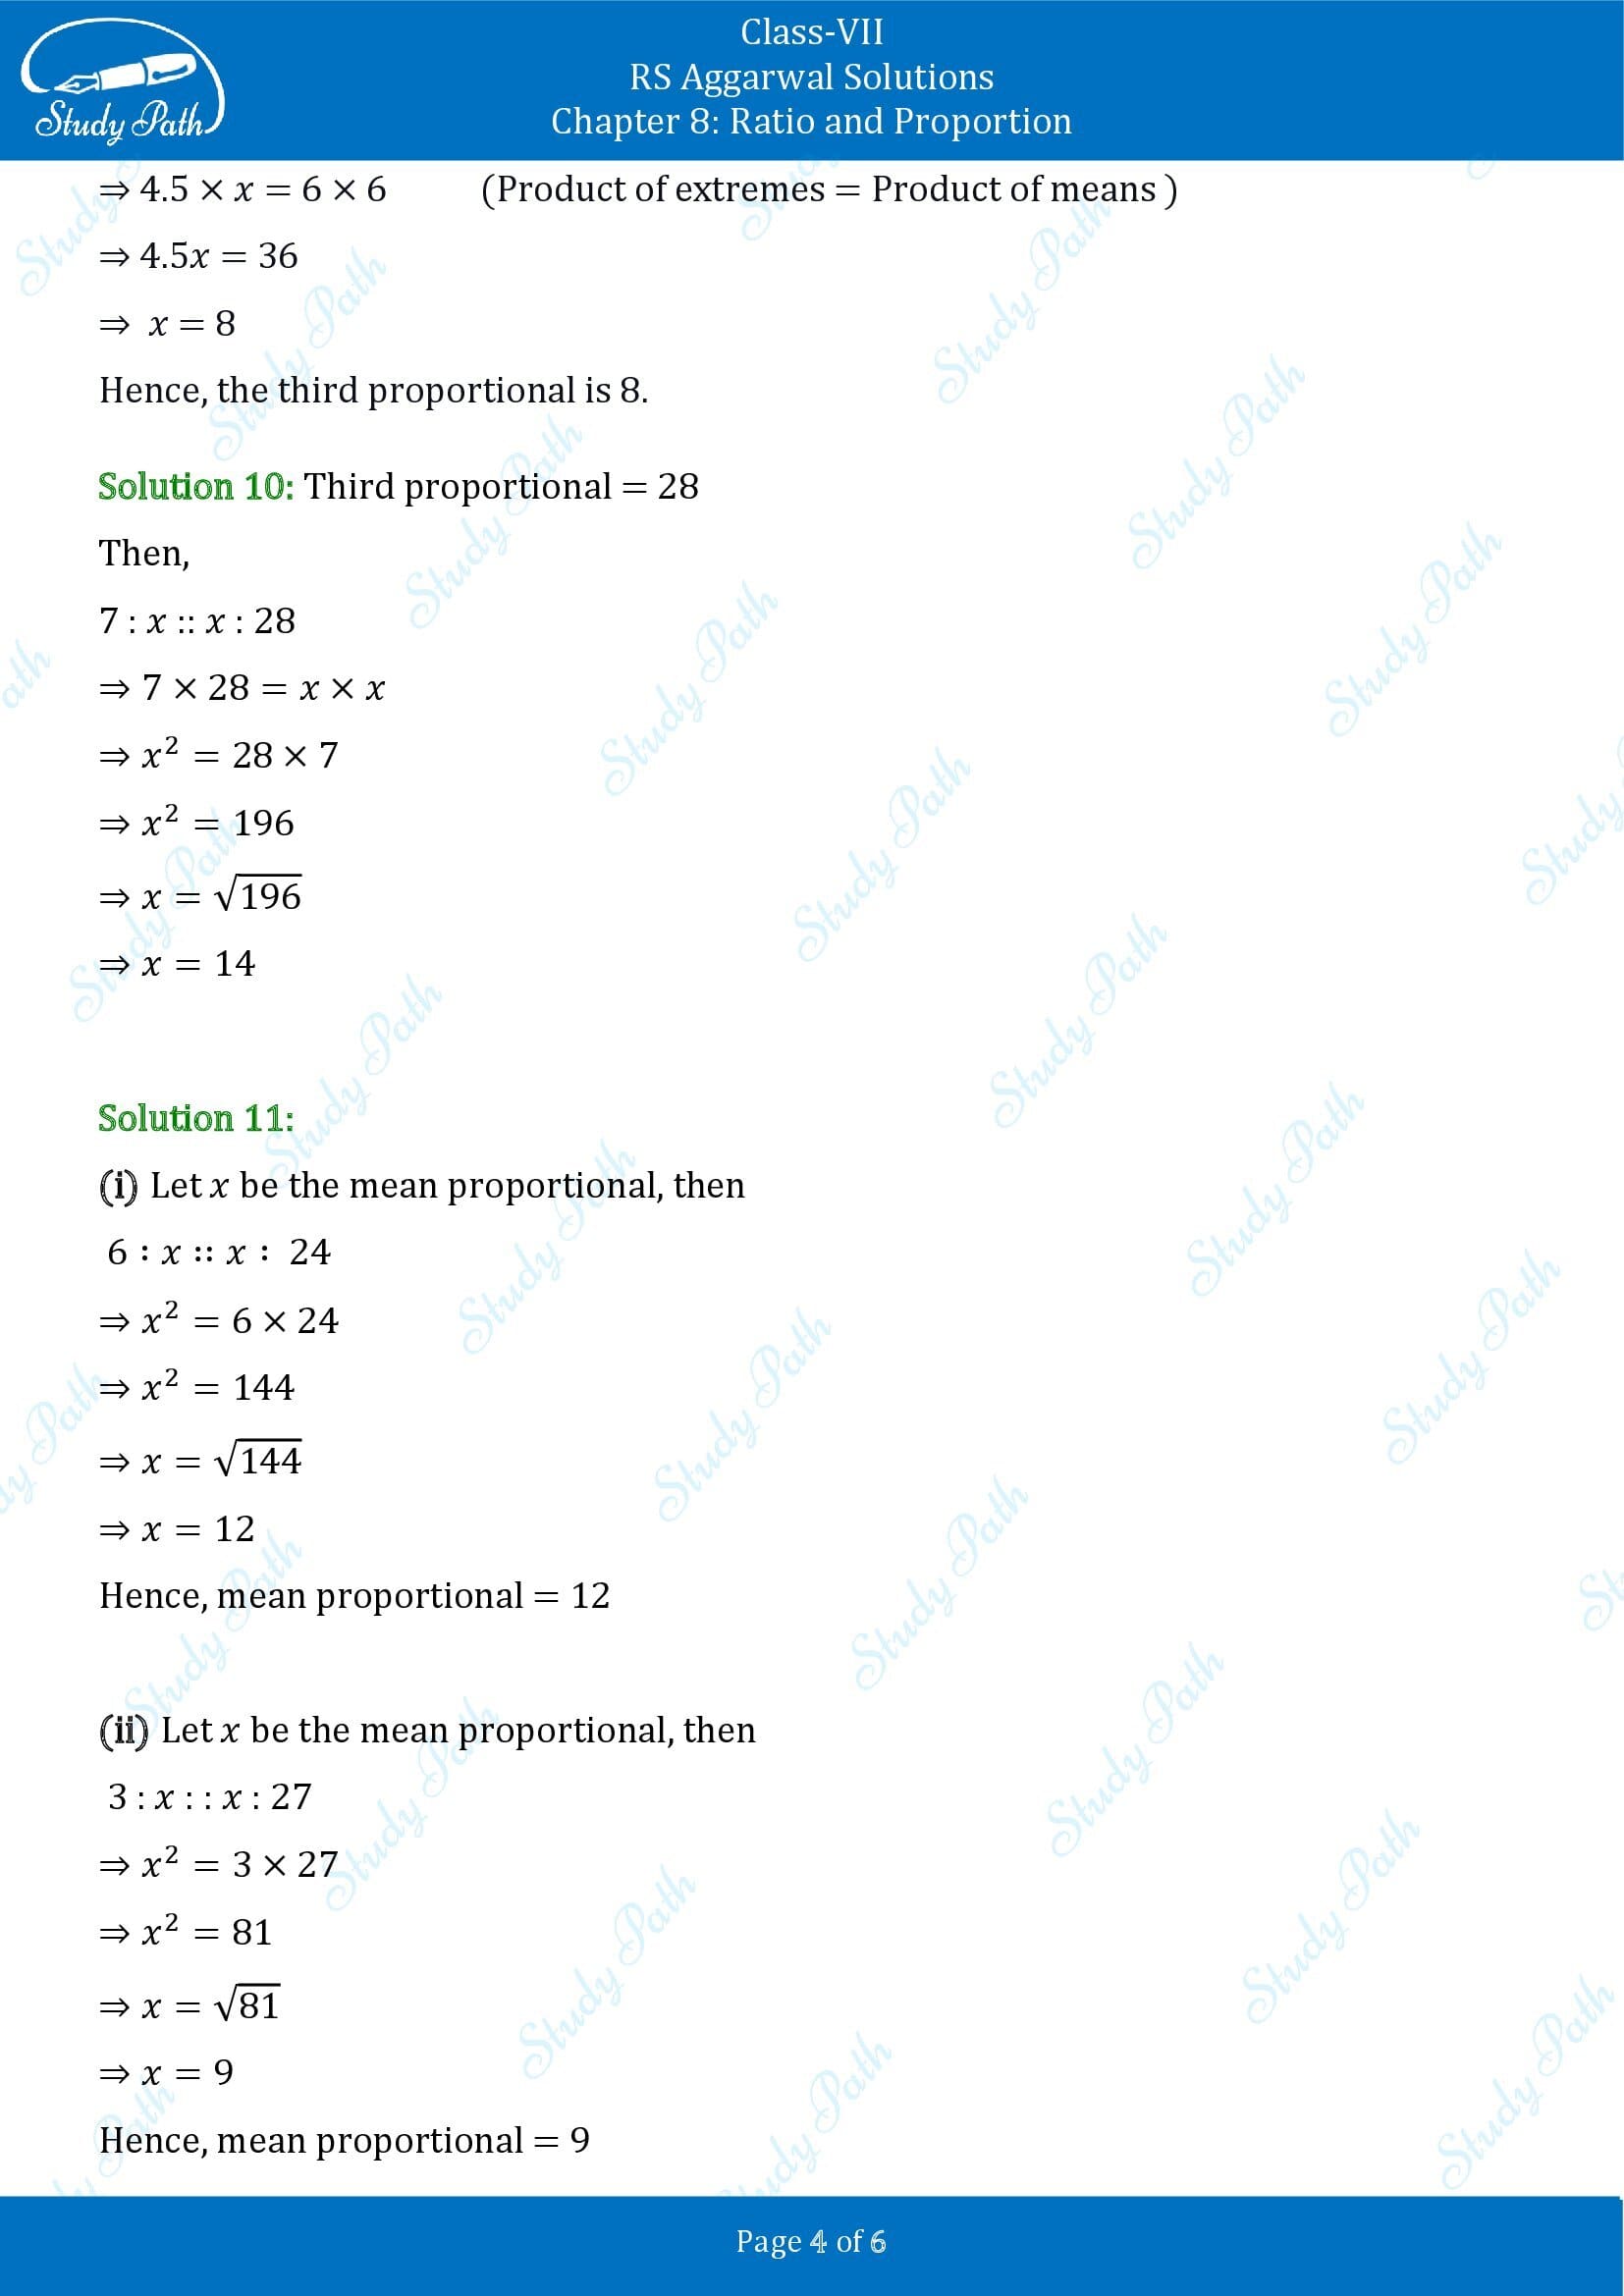 RS Aggarwal Solutions Class 7 Chapter 8 Ratio and Proportion Exercise 8B 00004